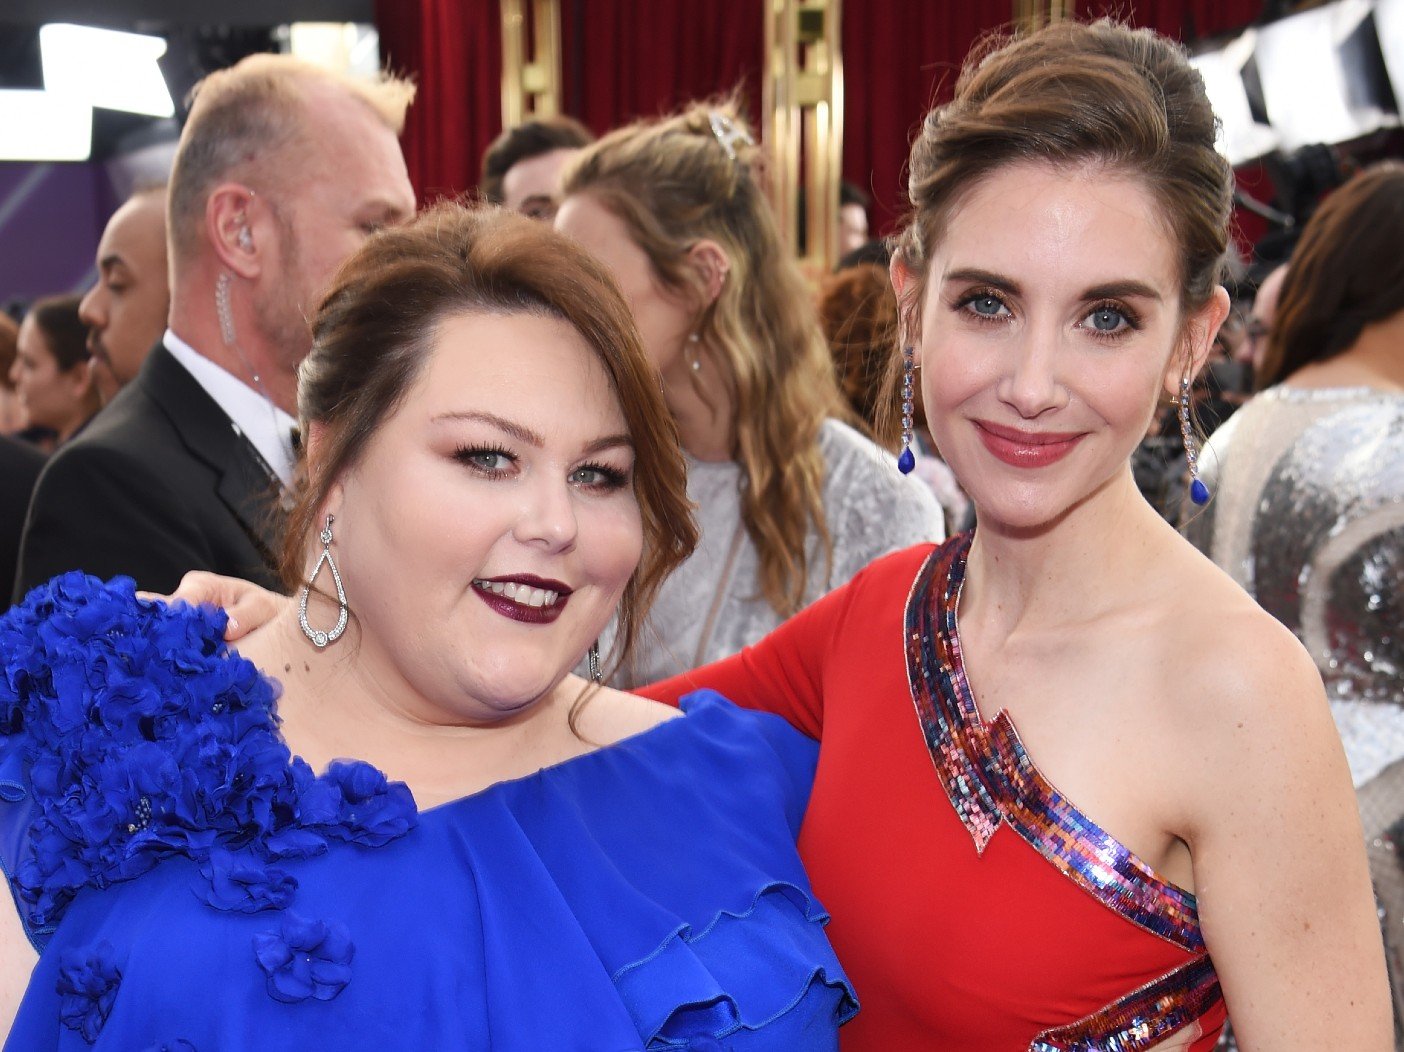 Why People Think Chrissy Metz Called Allison Brie ‘B’ Word At Golden Globes